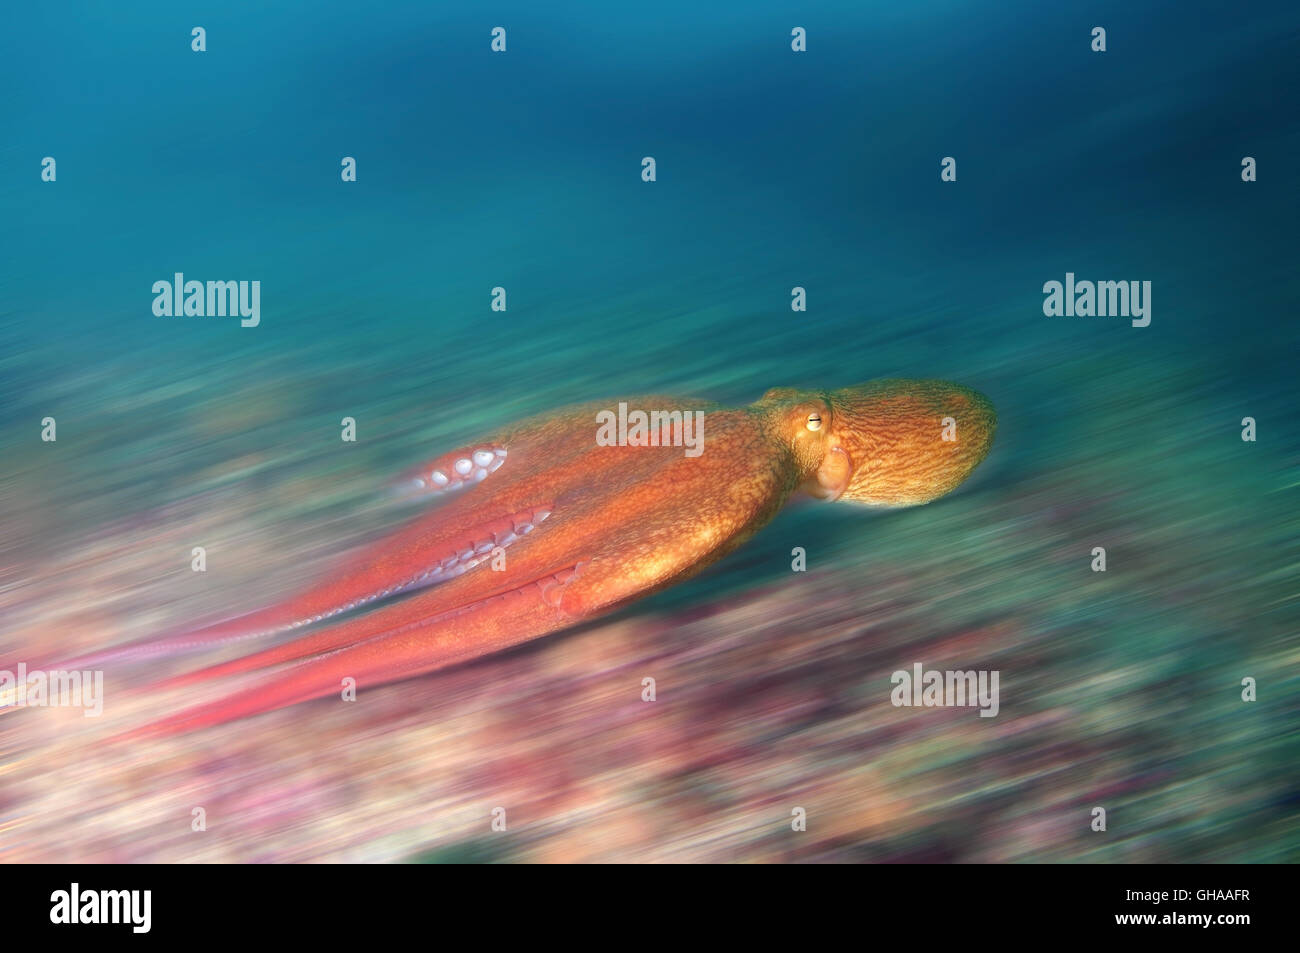 Giant Pacific octopus or North Pacific giant octopus (Enteroctopus dofleini) dynamically floats above the bottom, North Pacific  Stock Photo